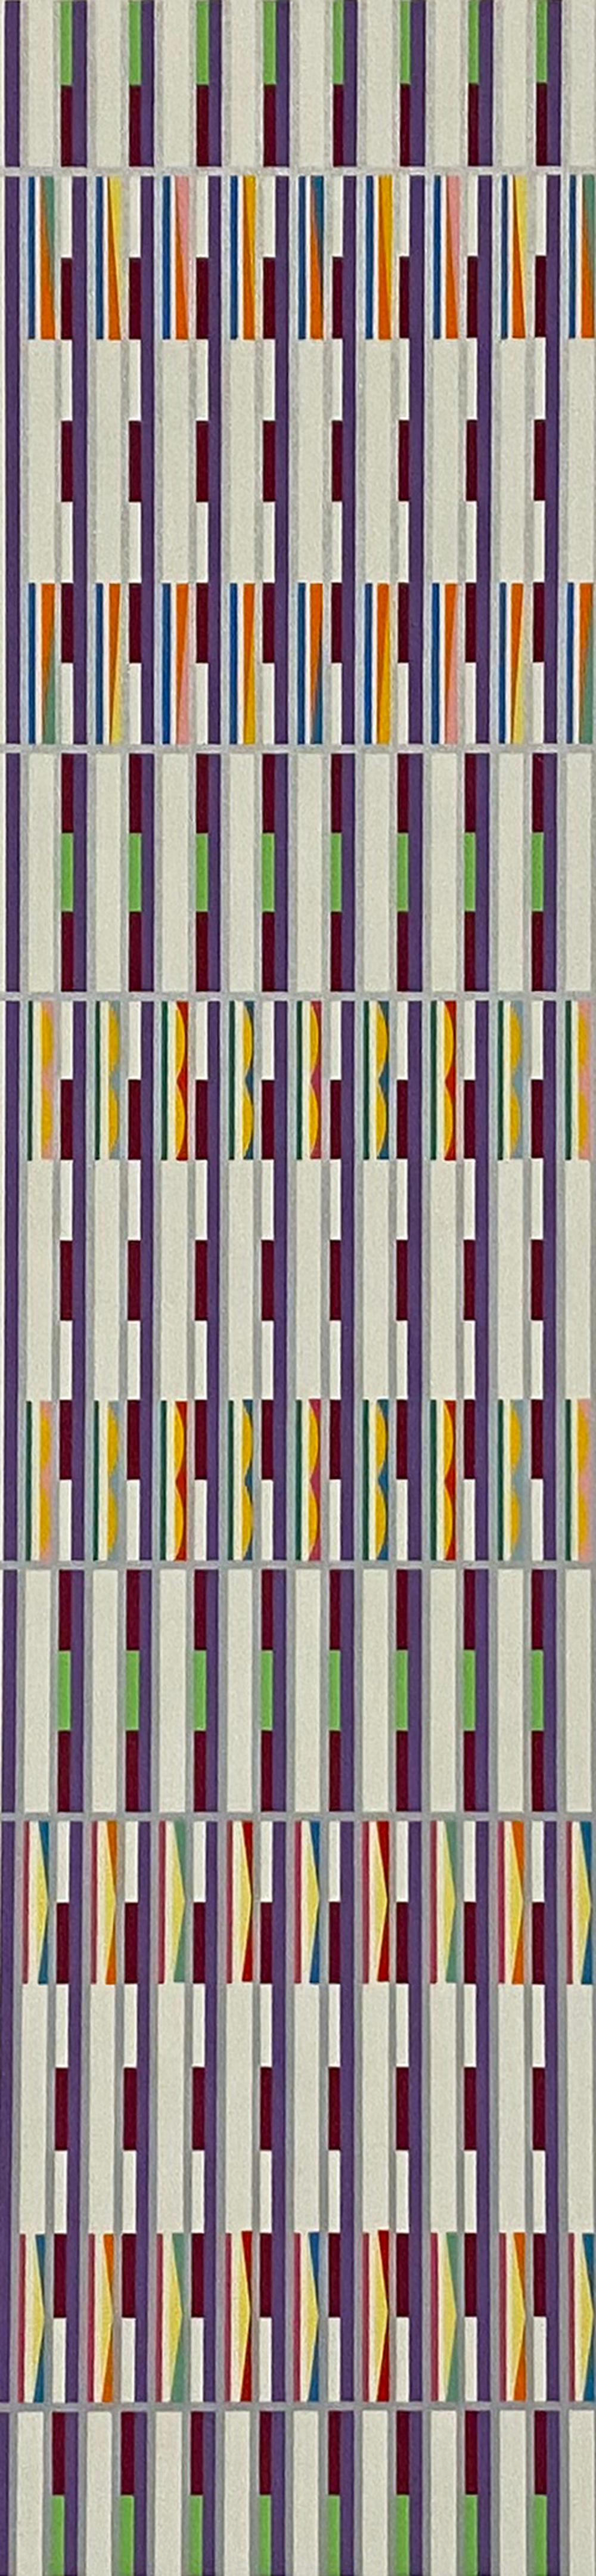 Yaacov Agam Abstract Print - Untitled, from Vertical Orchestration